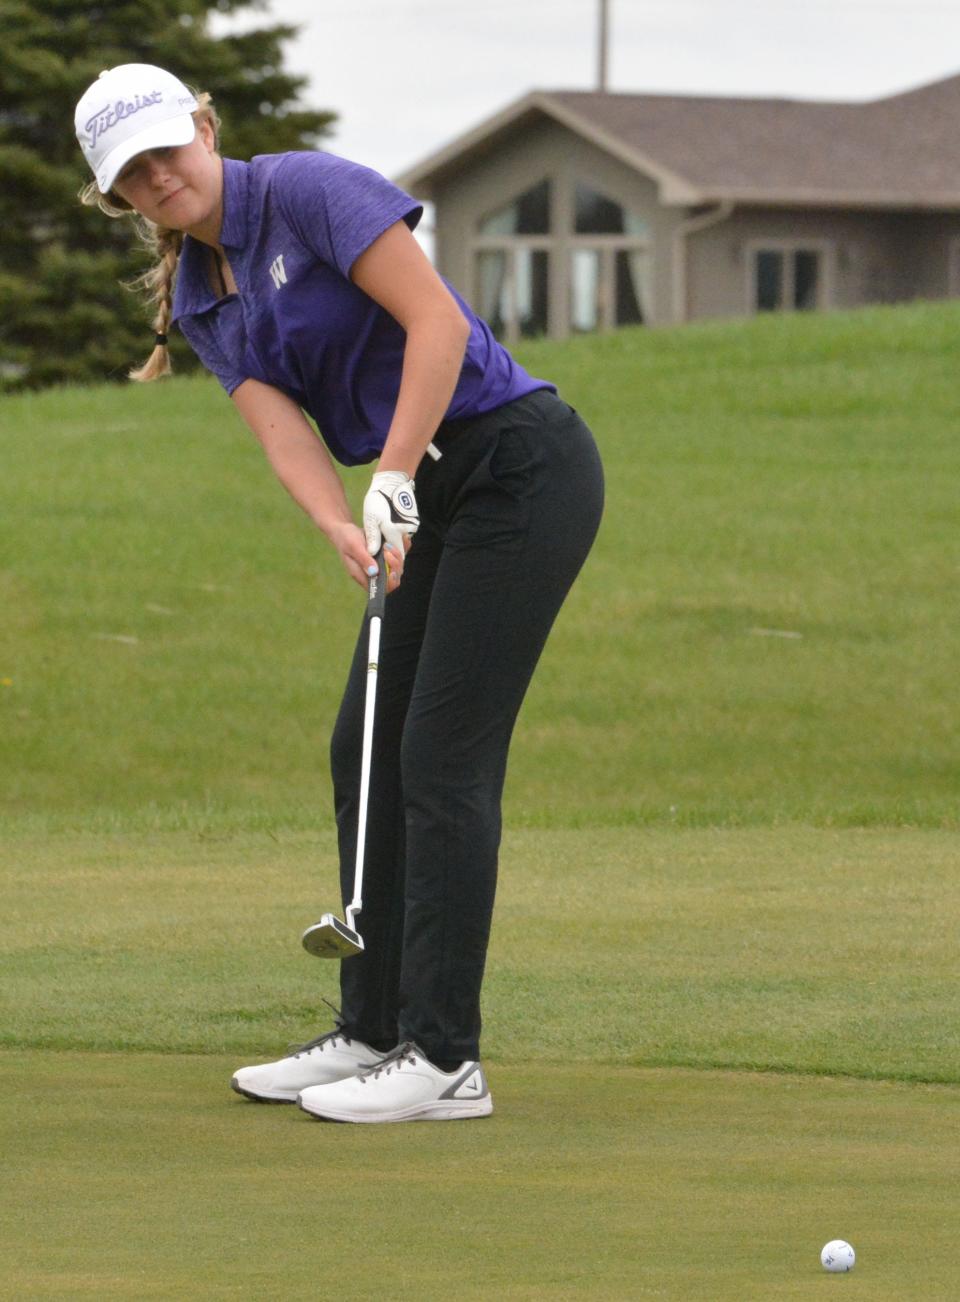 Watertown's Aspen Reynolds tracks her putt on No. 5 Red on Tuesday during the Watertown Girls Golf Invitational at Cattail Crossing Golf Course.